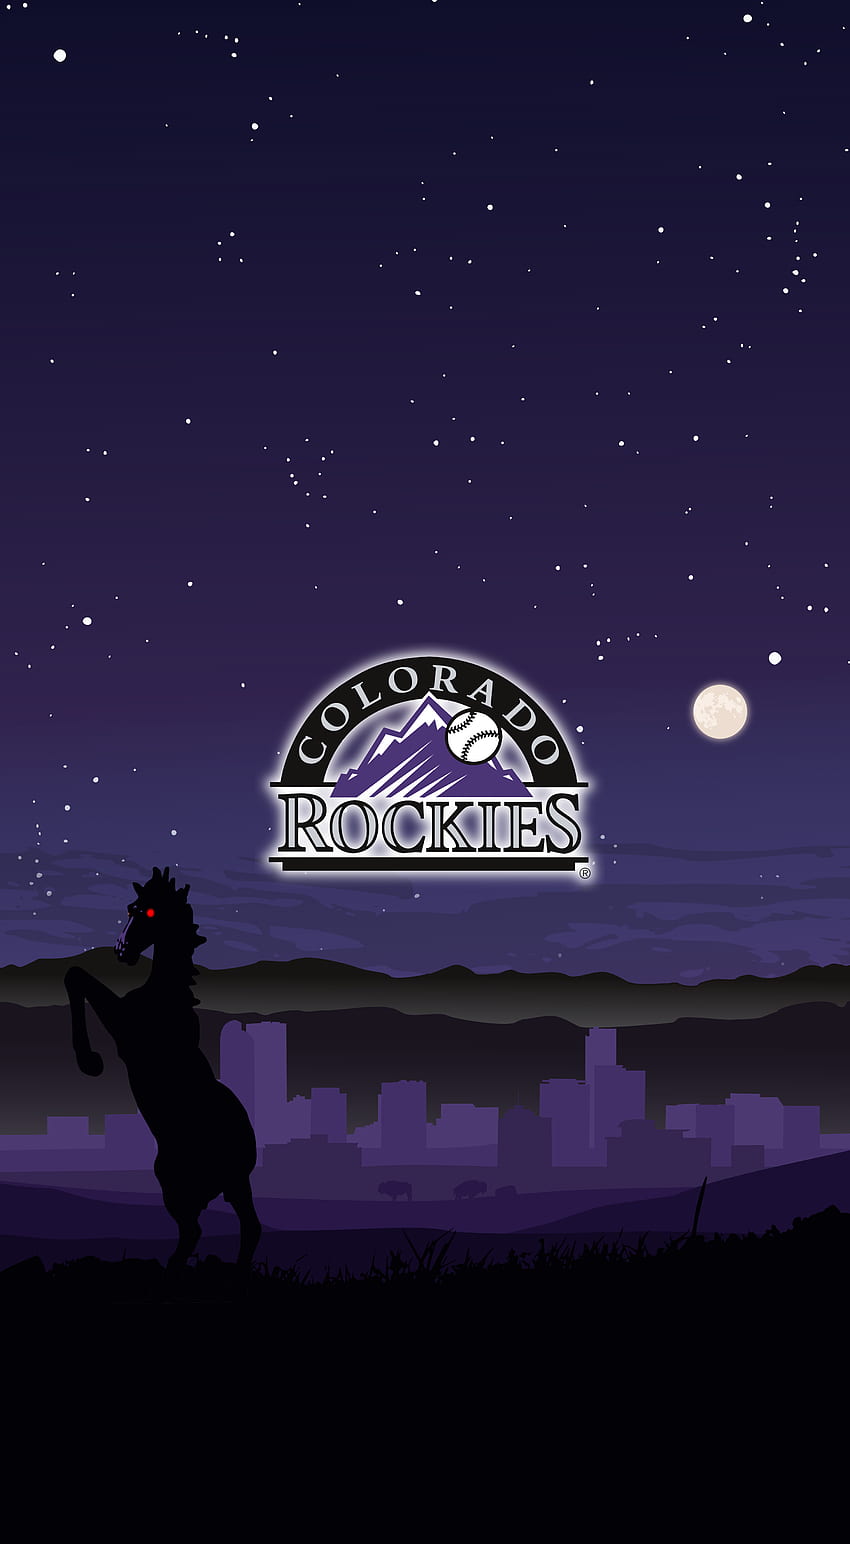 I made a mobile for Denver and I thought this, Colorado Rockies HD phone wallpaper